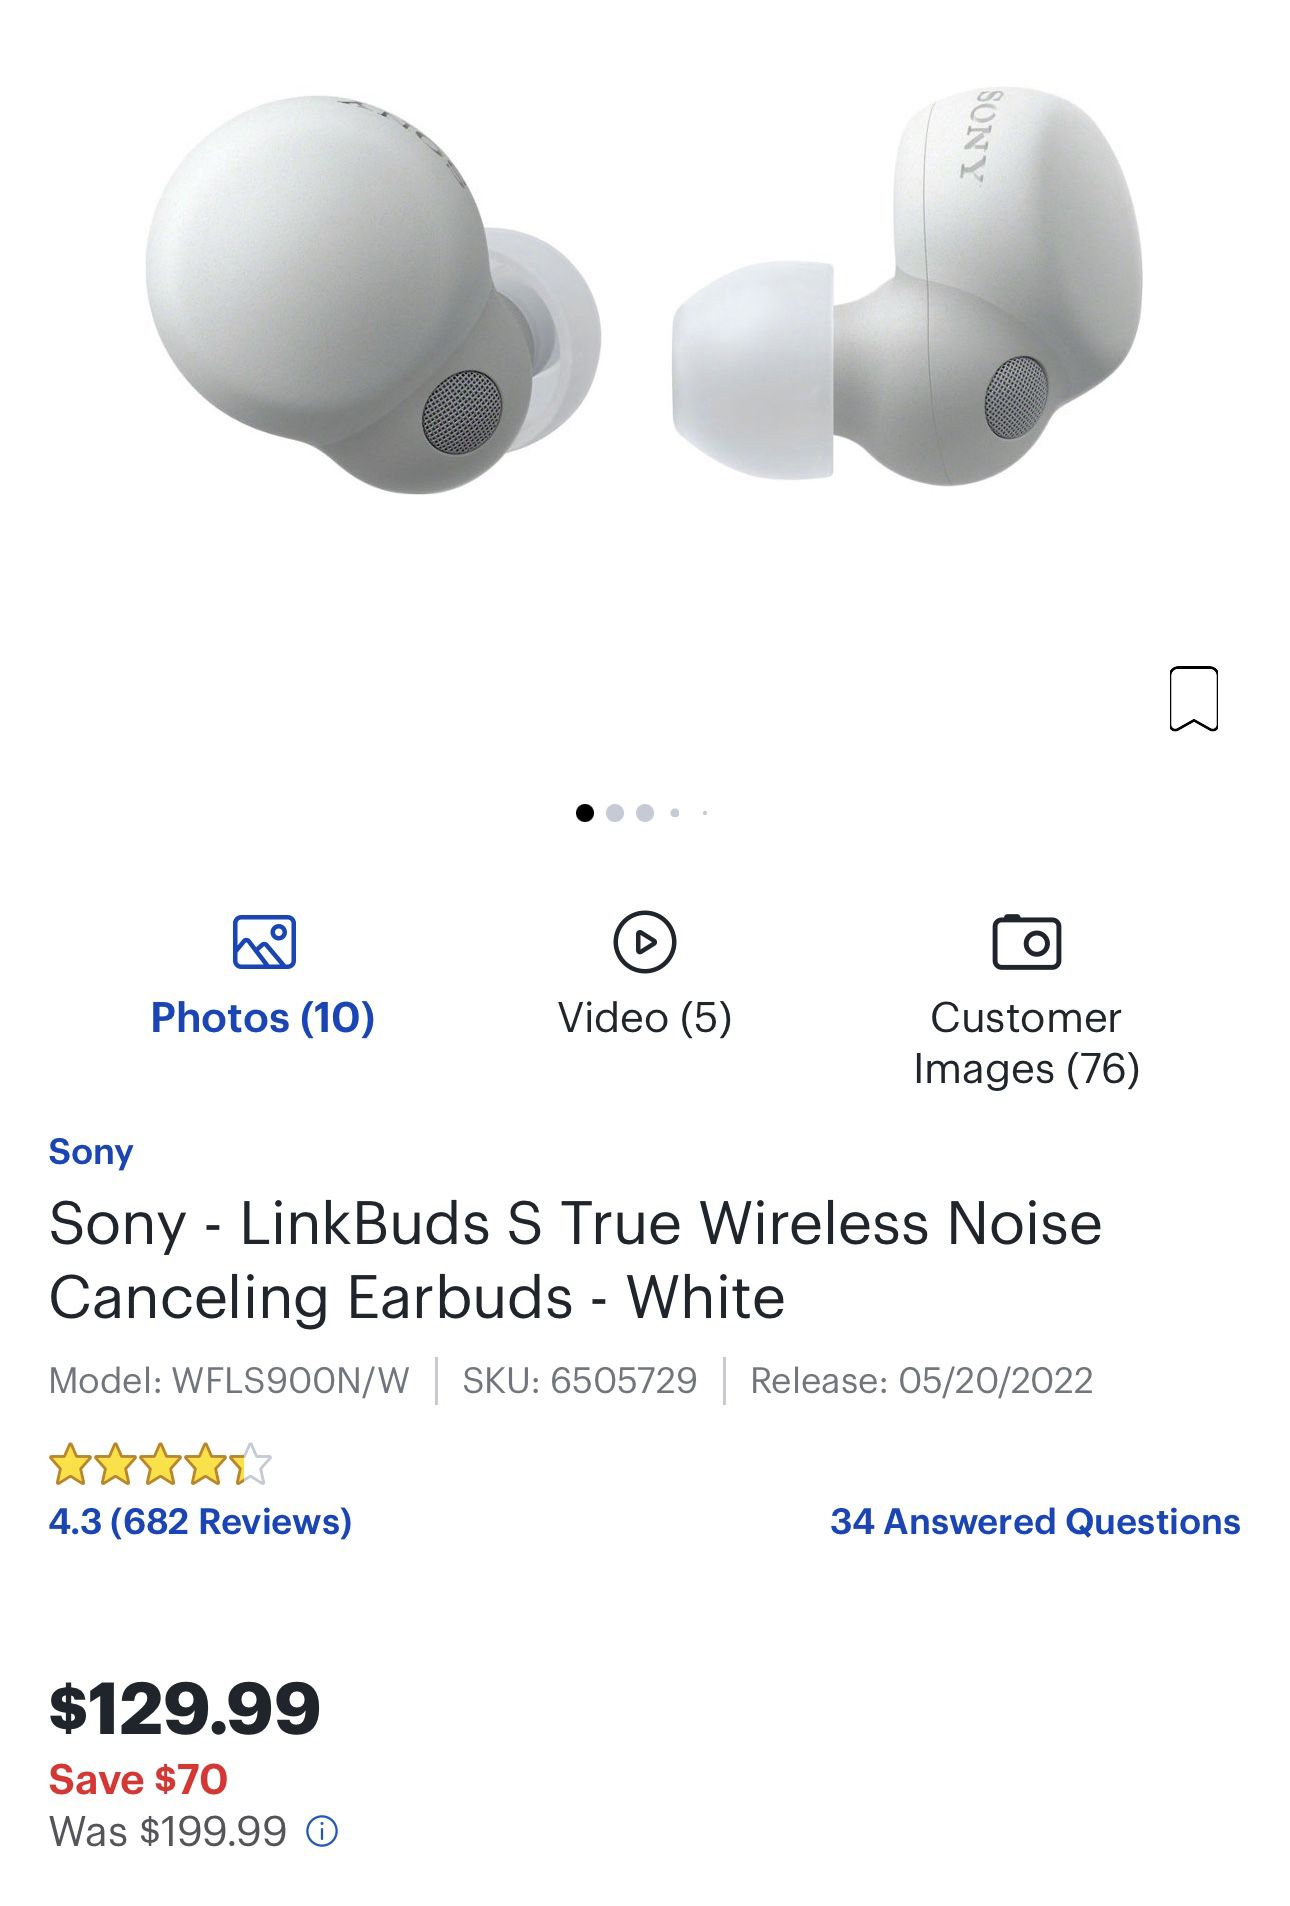 Sony- LinkBuds S True Wireless Noise Canceling Earbuds + Protective Case  (Warranty Included On Earbuds)